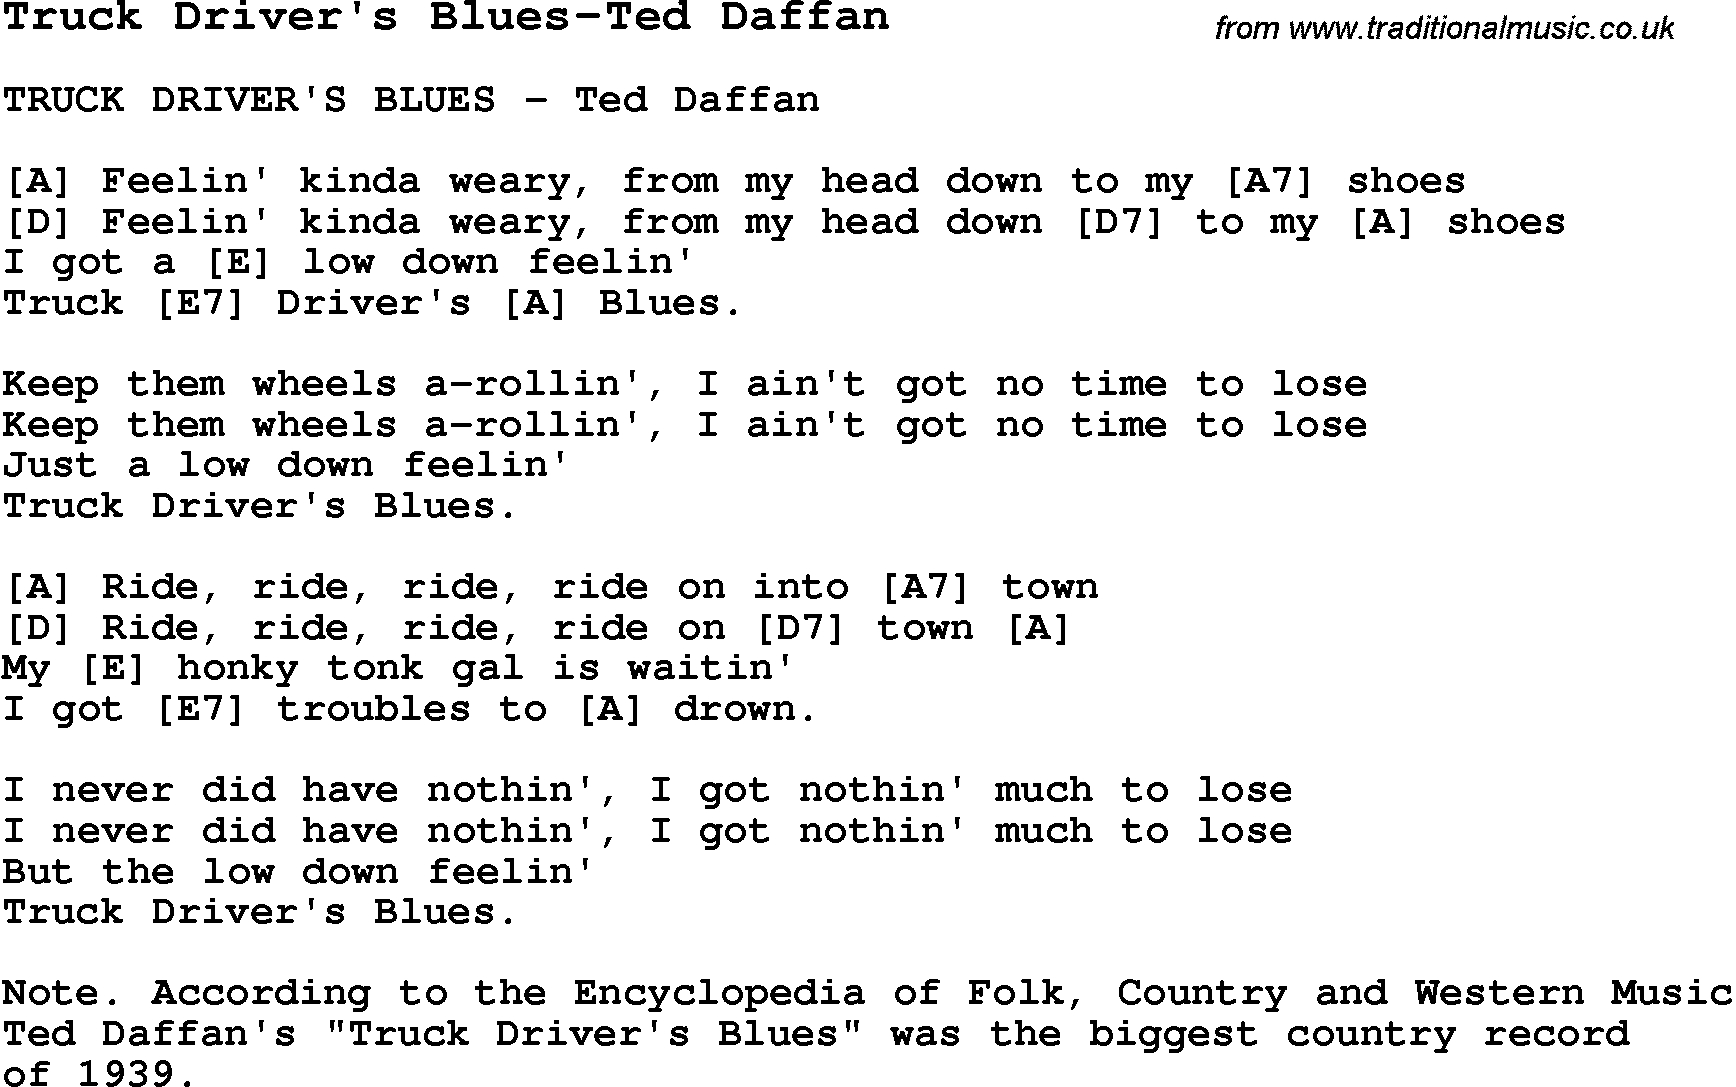 Blues Guitar Song, lyrics, chords, tablature, playing hints for Truck Driver's Blues-Ted Daffan